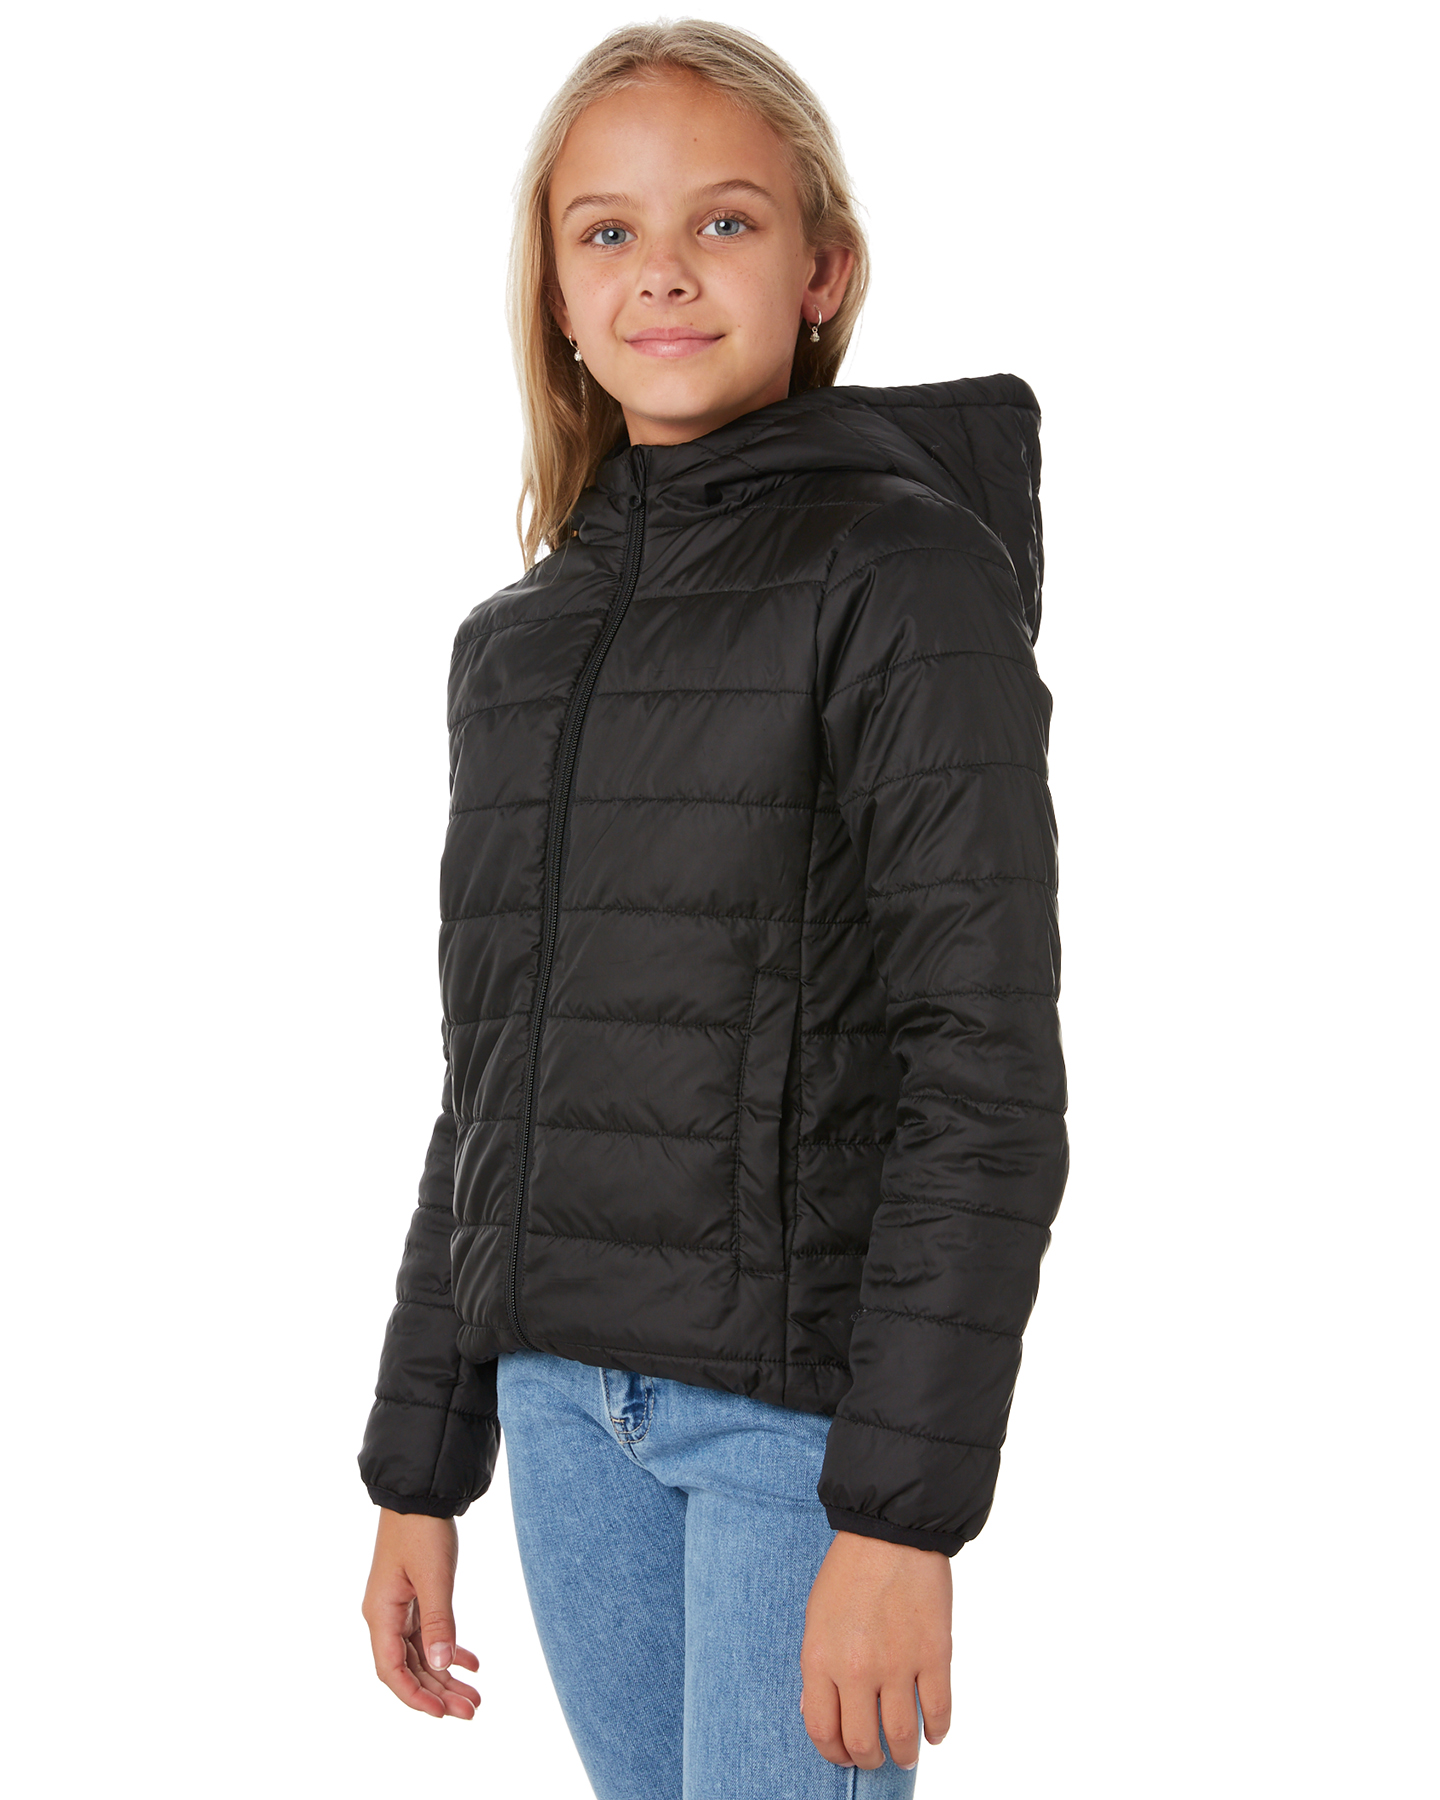 Rip Curl Teen Girl The Search Puffer - Black | SurfStitch